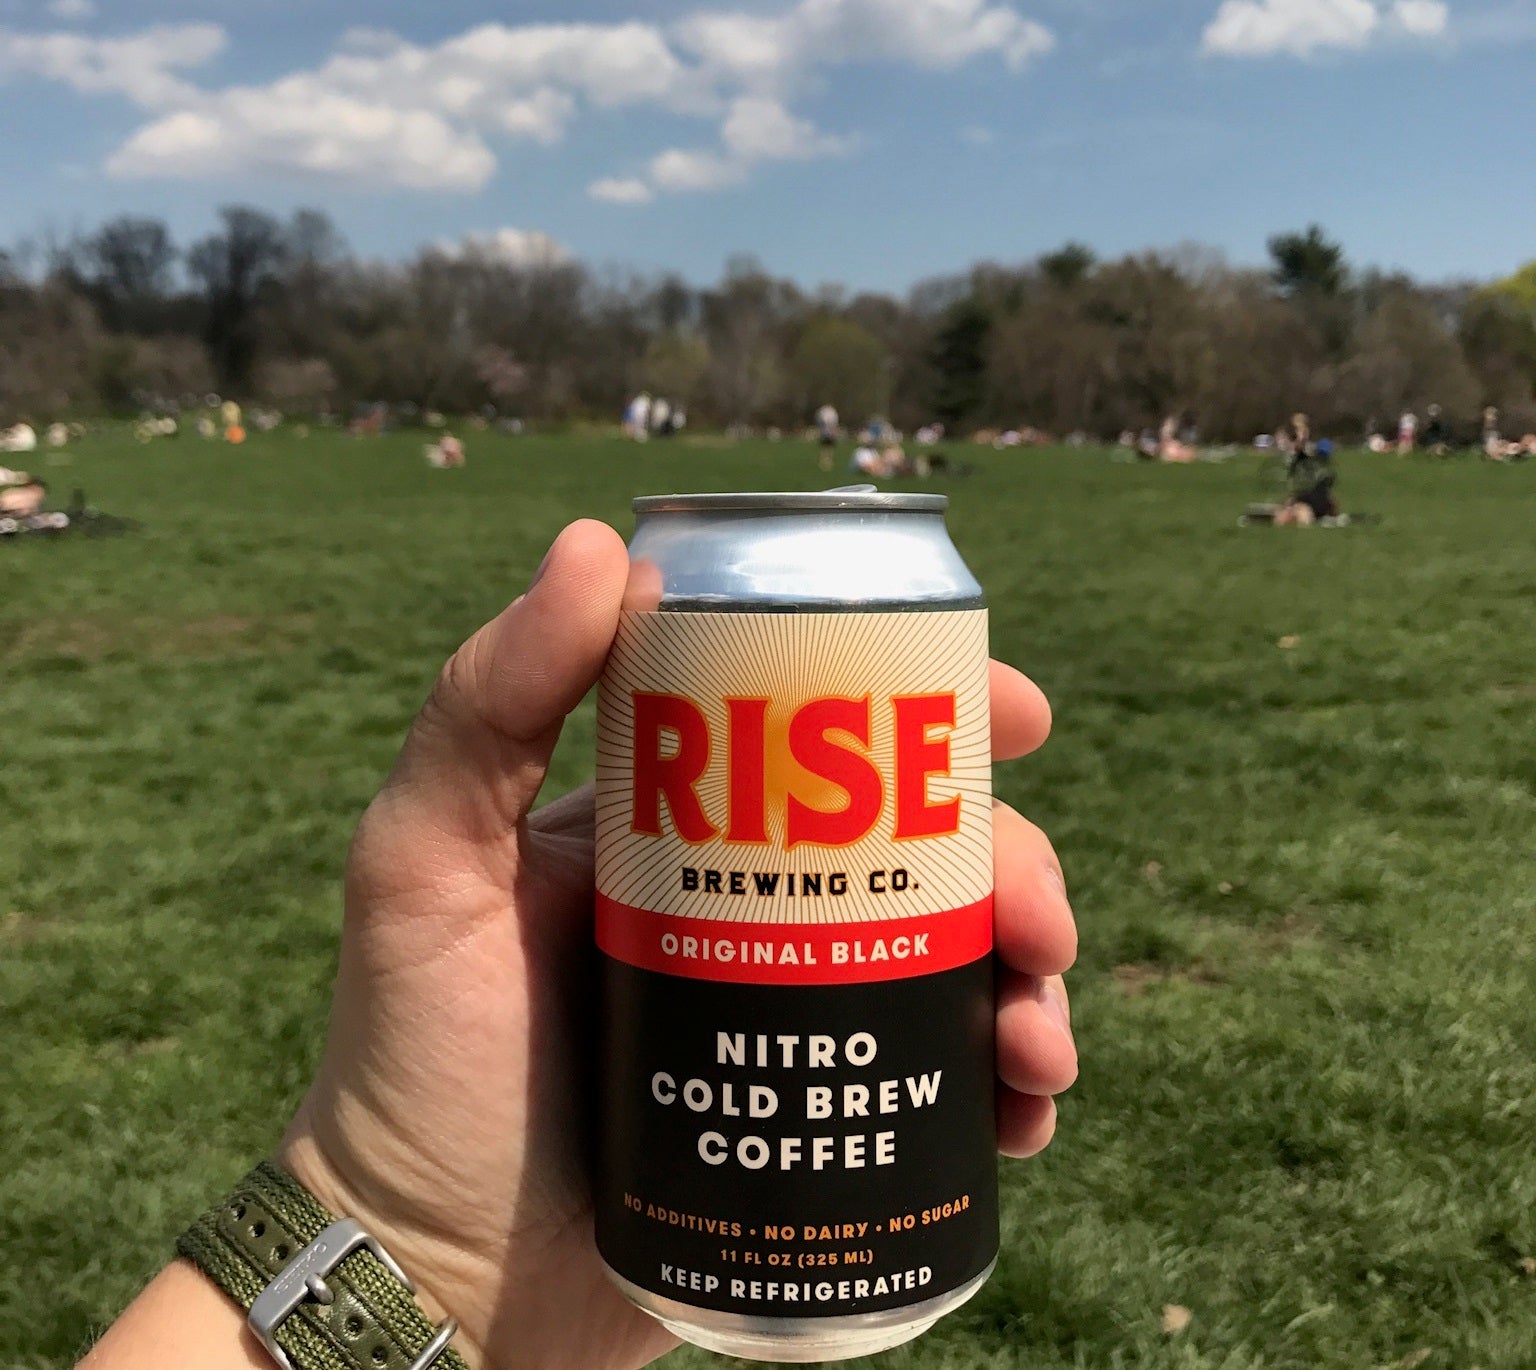 RISE Brewing Co nitro cold brew coffee Original Black in a can in the park for exercise and recreation